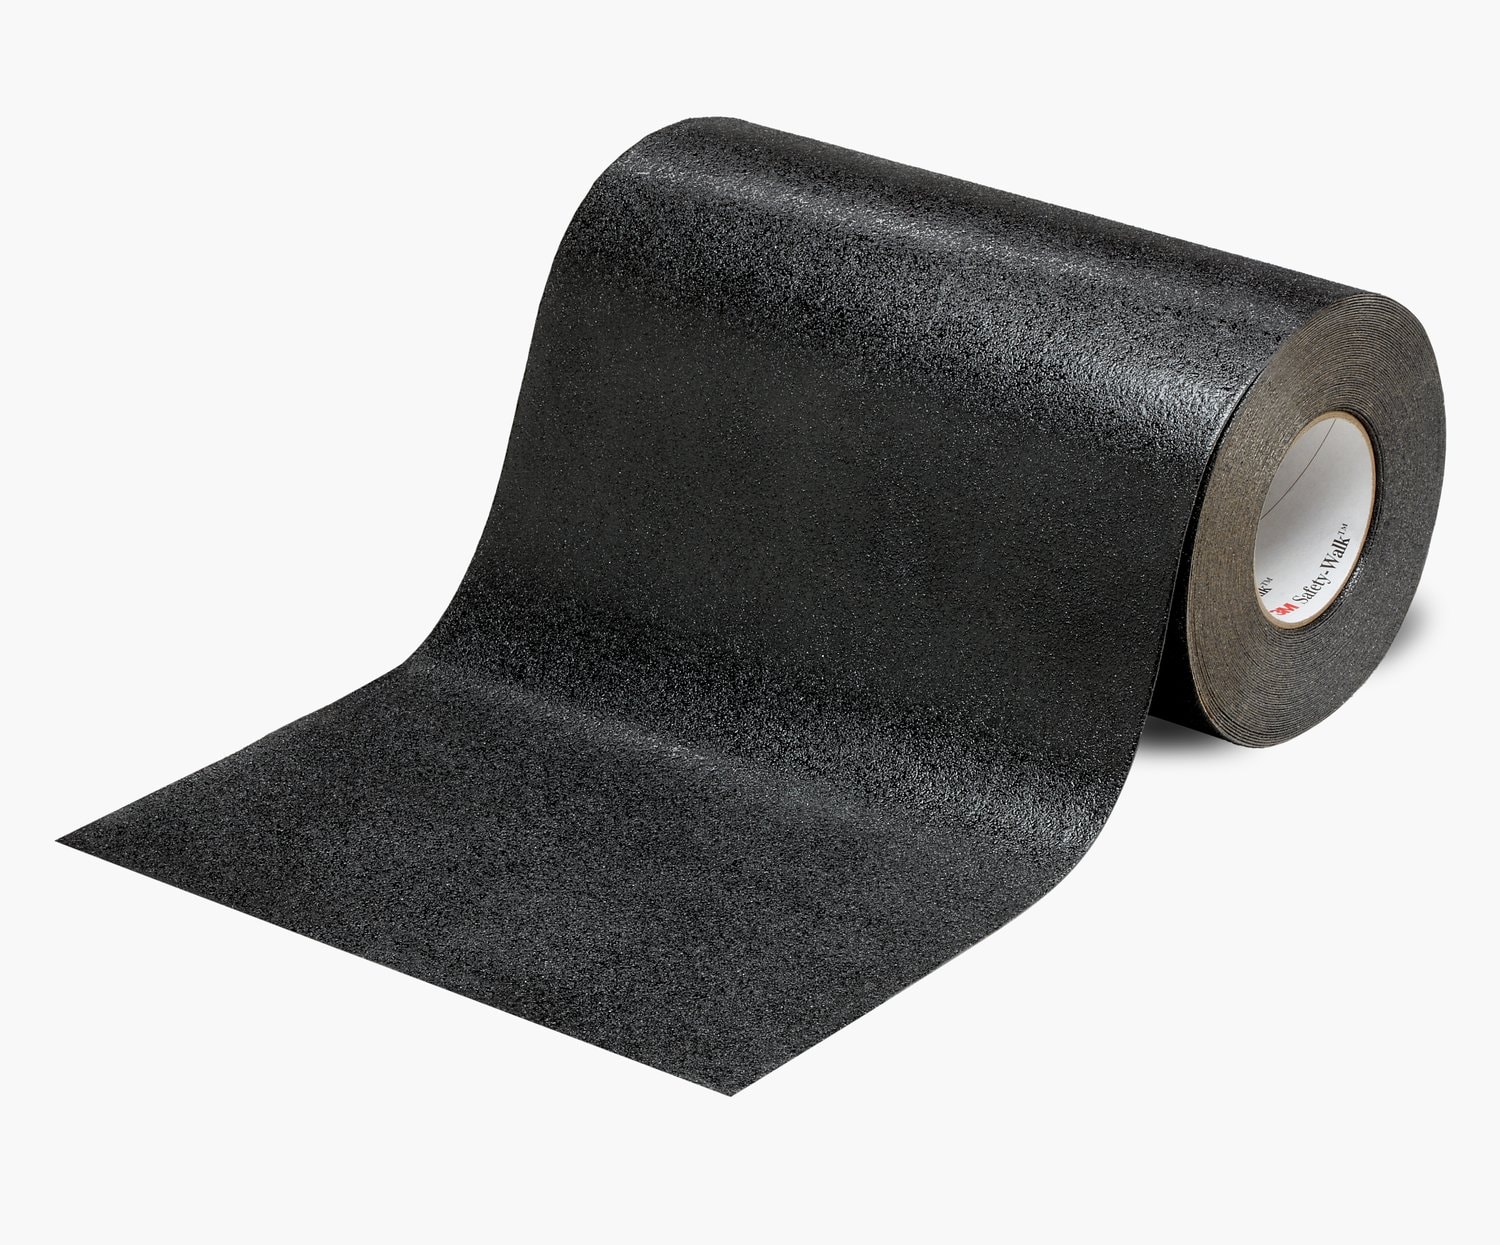 7100037275 - 3M Safety Walk Slip-Resistant Conformable Tapes & Treads 510,
BAMS-535-006, Configurable Roll